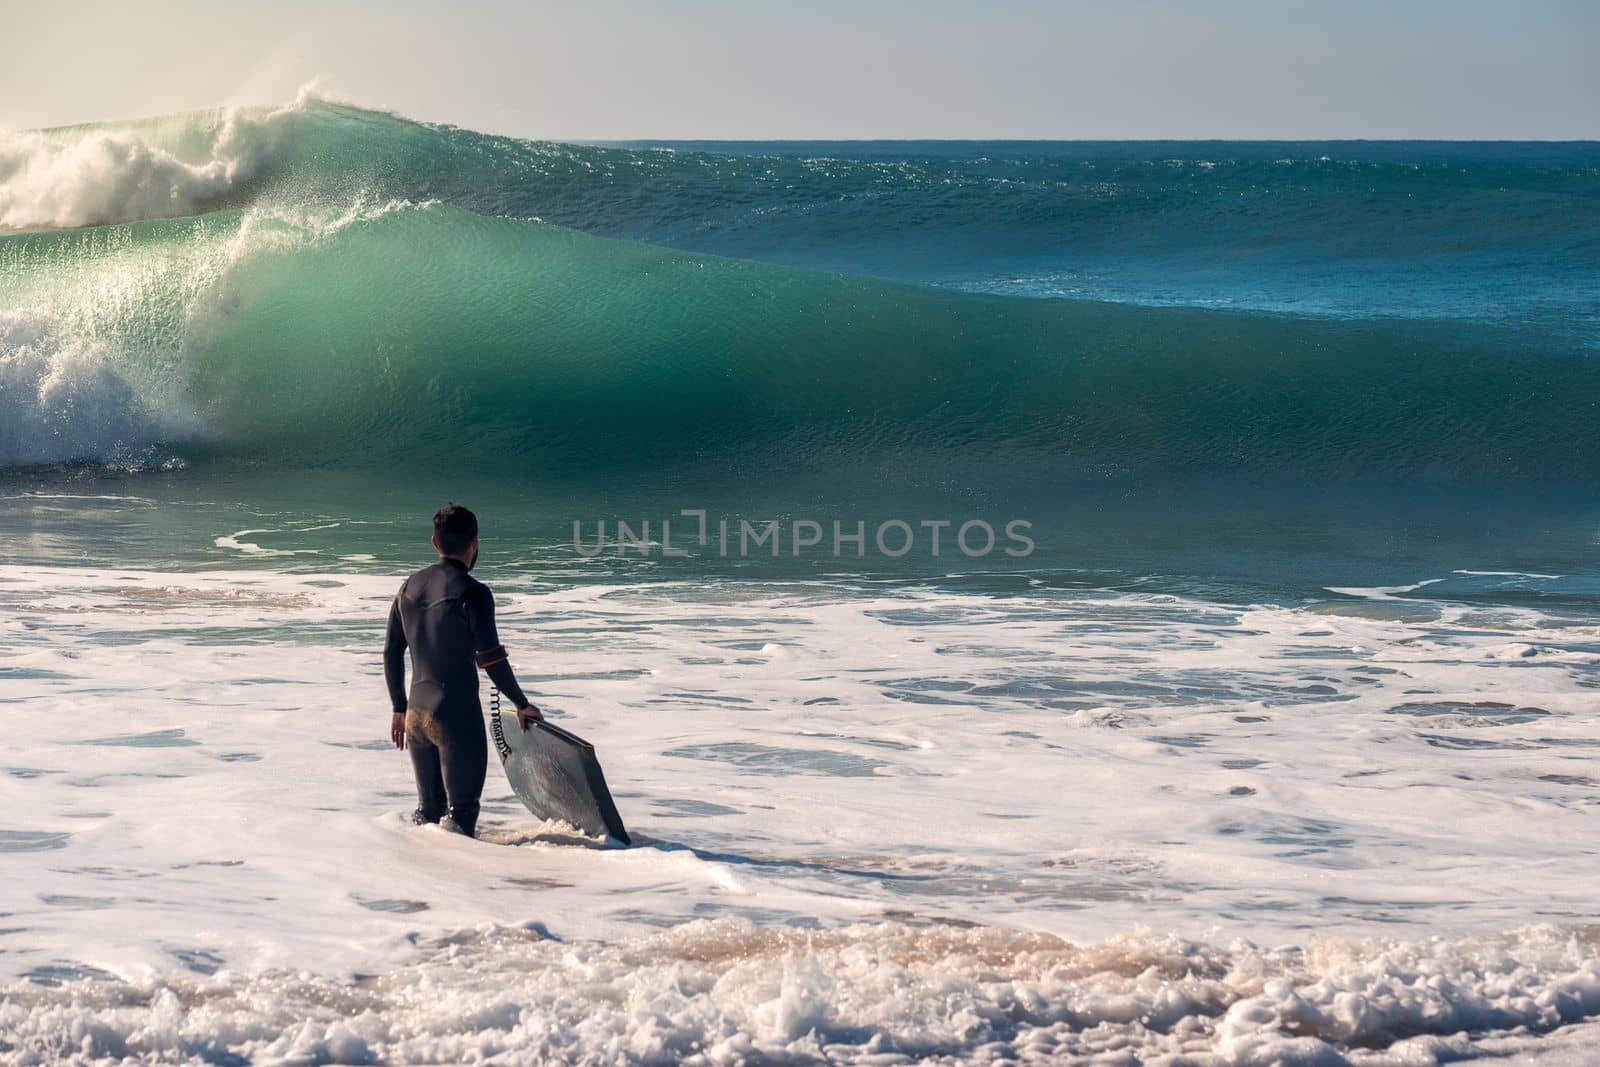 Surfer with board watches the waves from the shore by raulmelldo